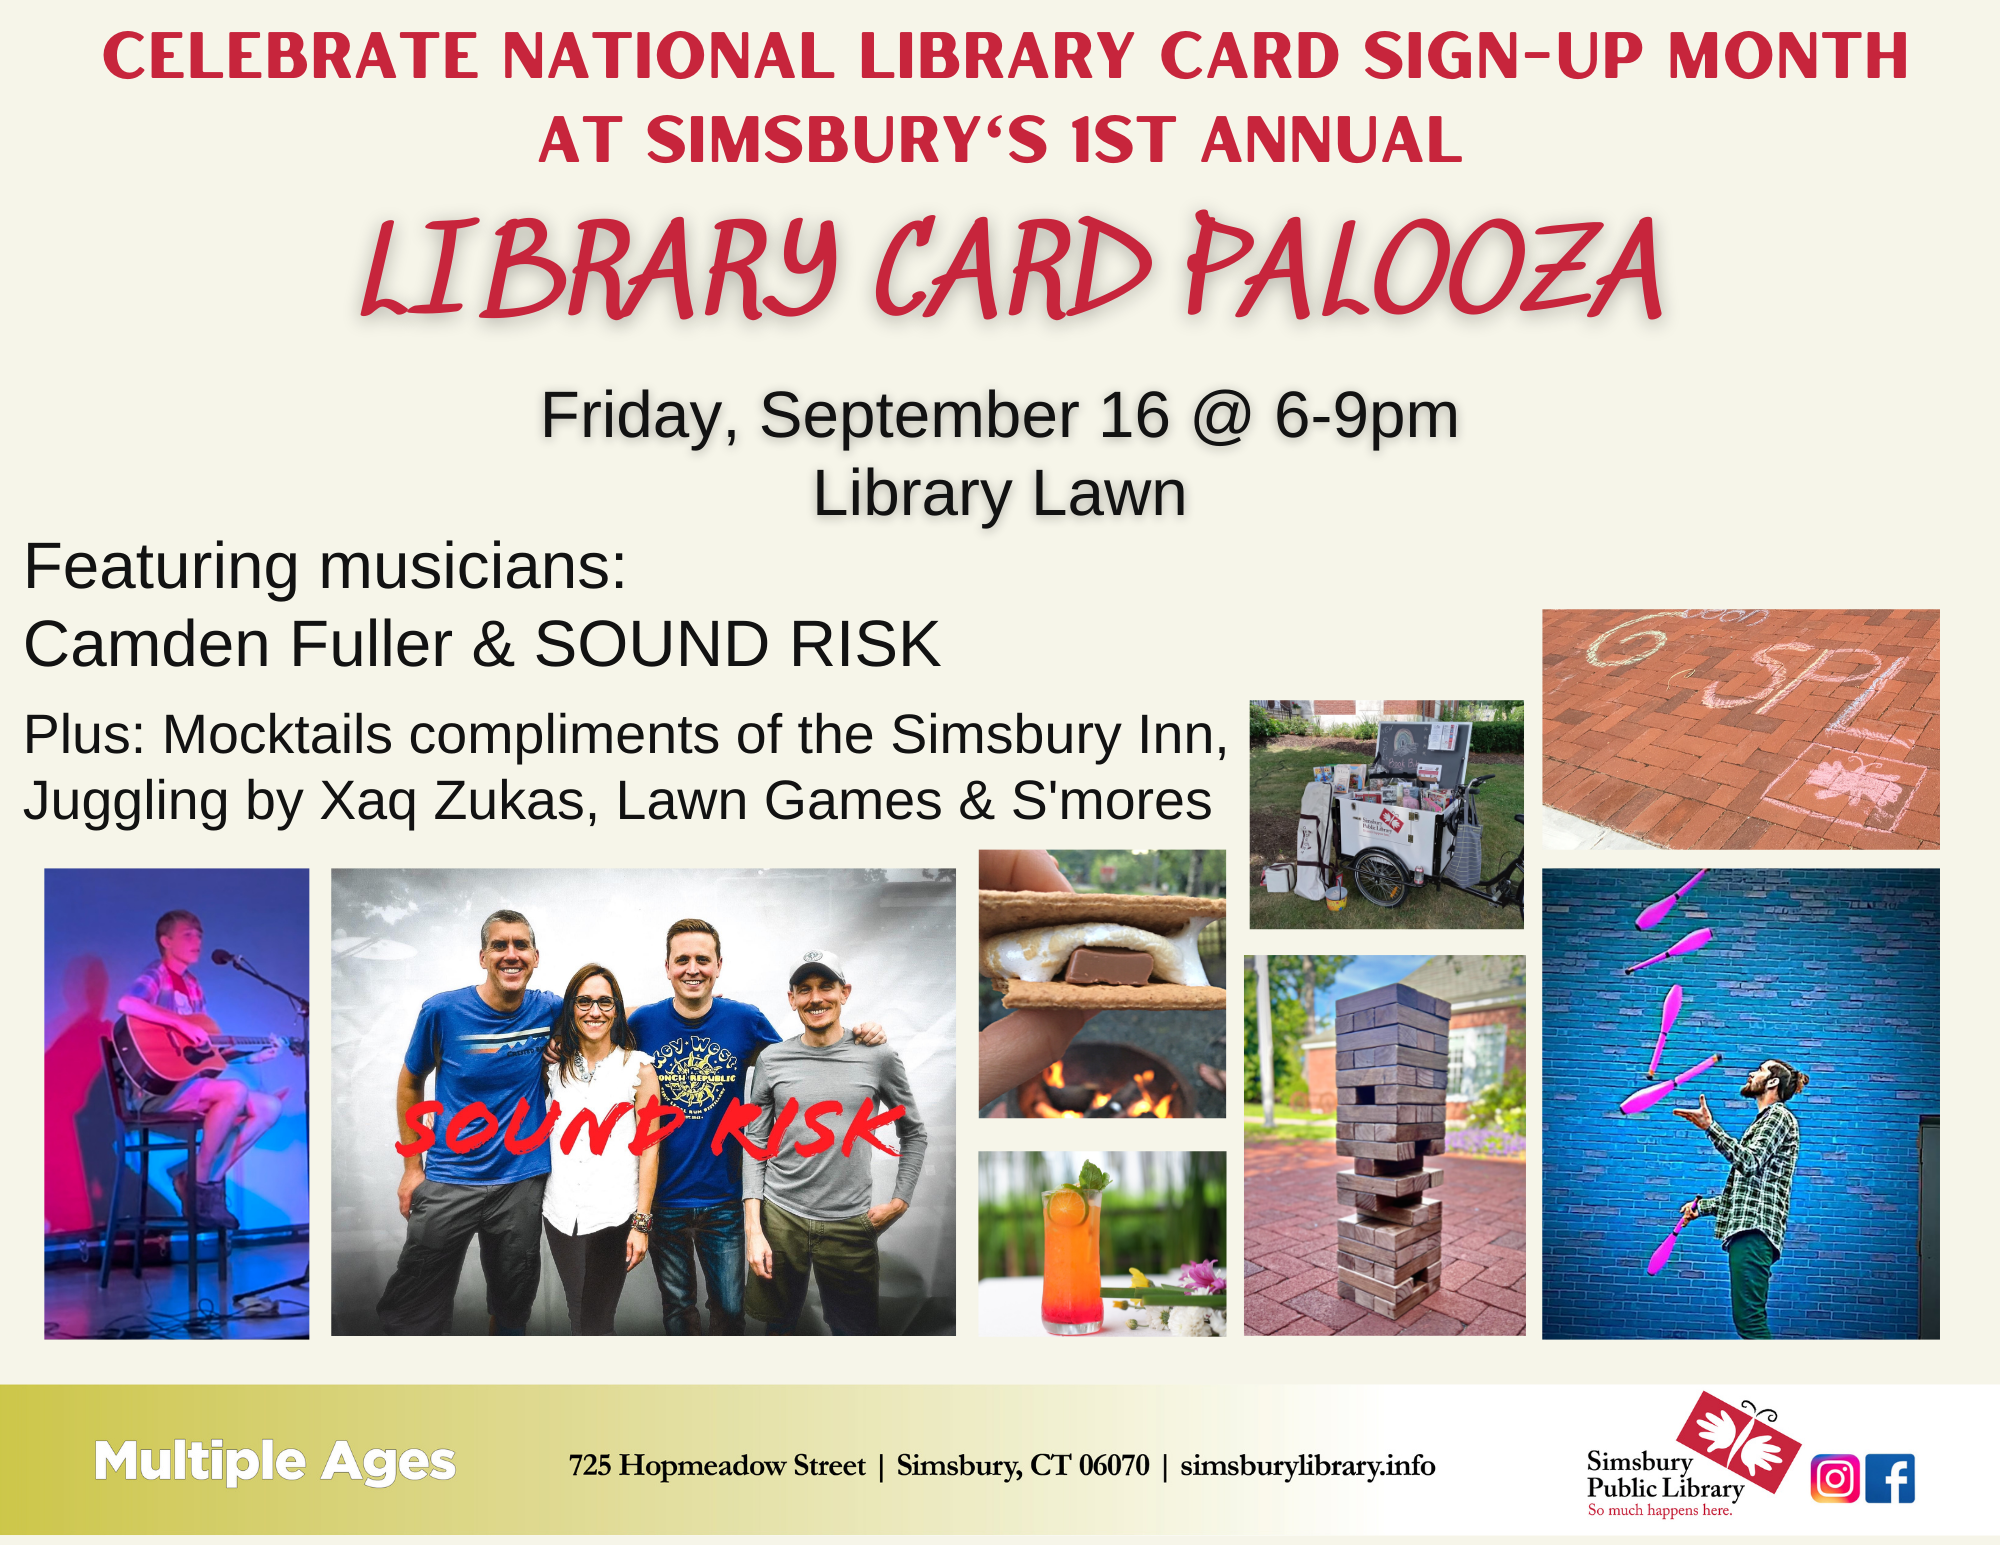 Library Card Palooza poster for Library Card Signup Month